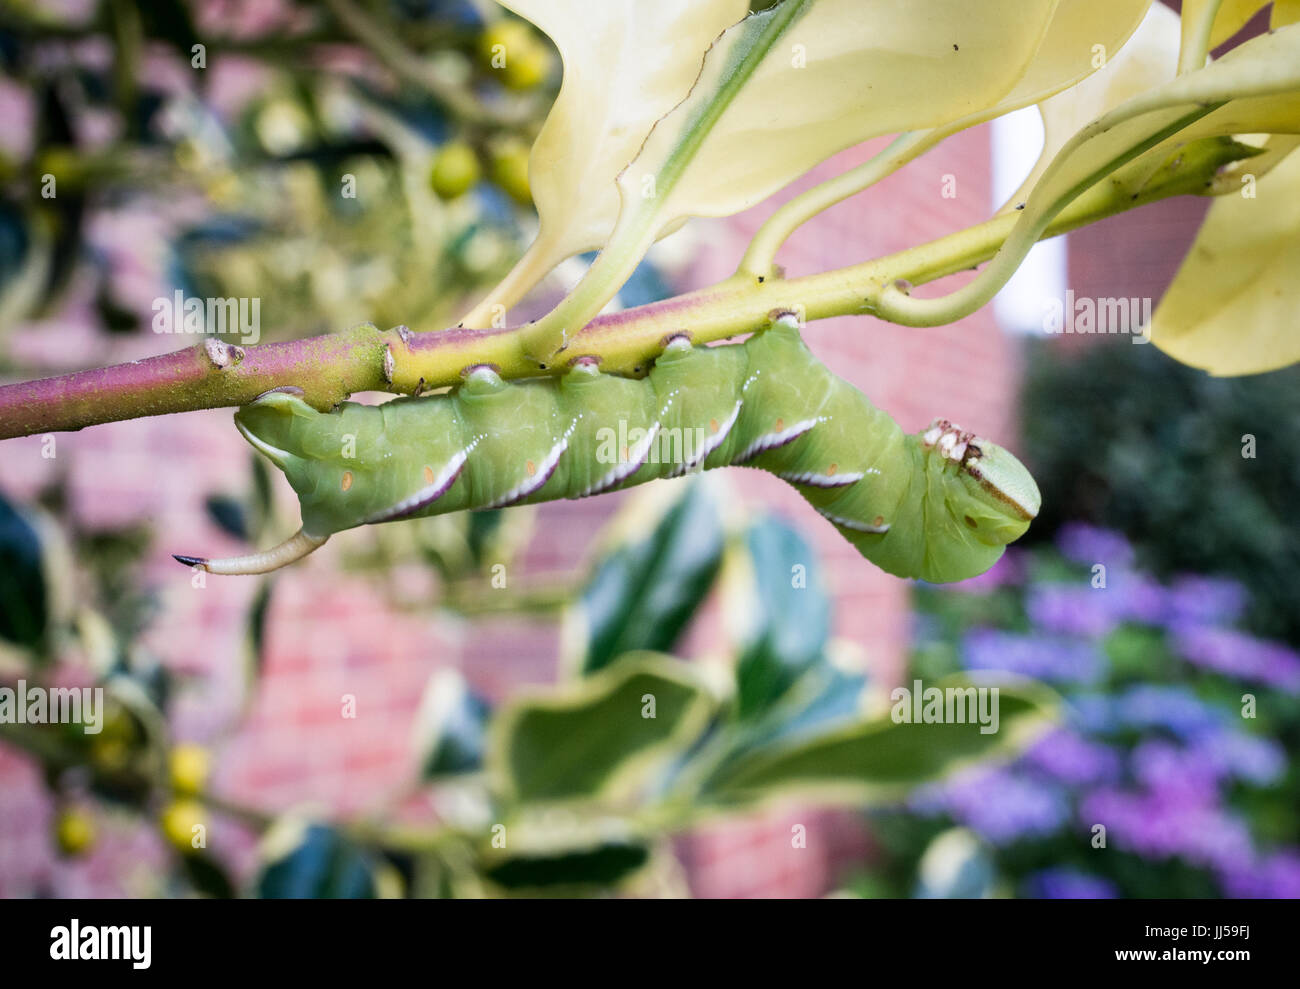 Large and succulent green white striped caterpillar of a privet hawk moth crawling along the branch of a holly bush, Hampshire, UK Stock Photo